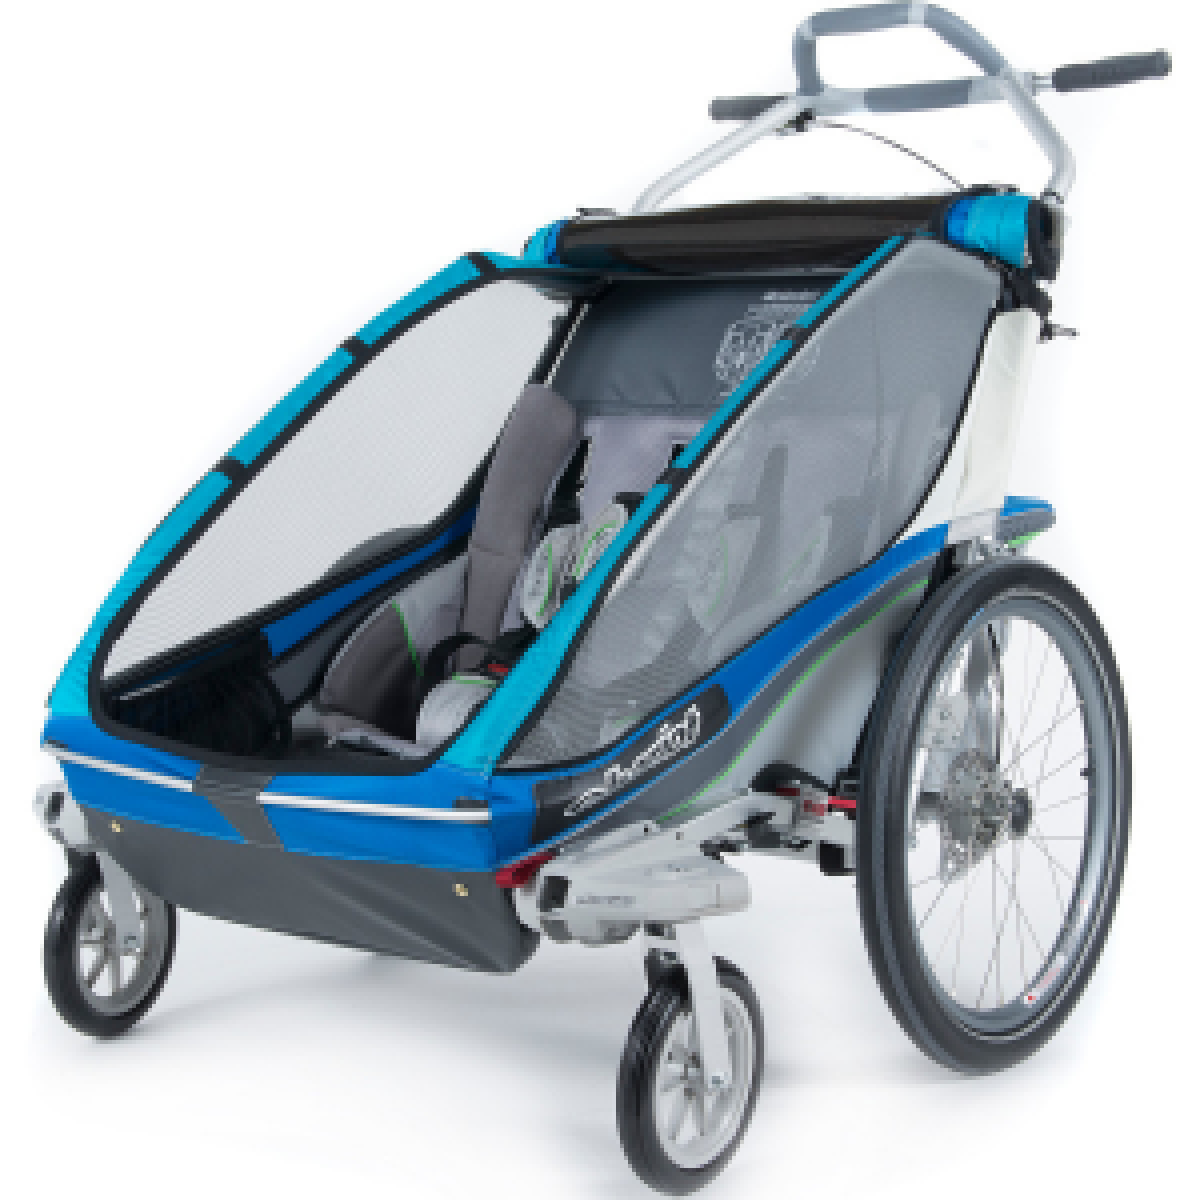 thule chariot strolling kit